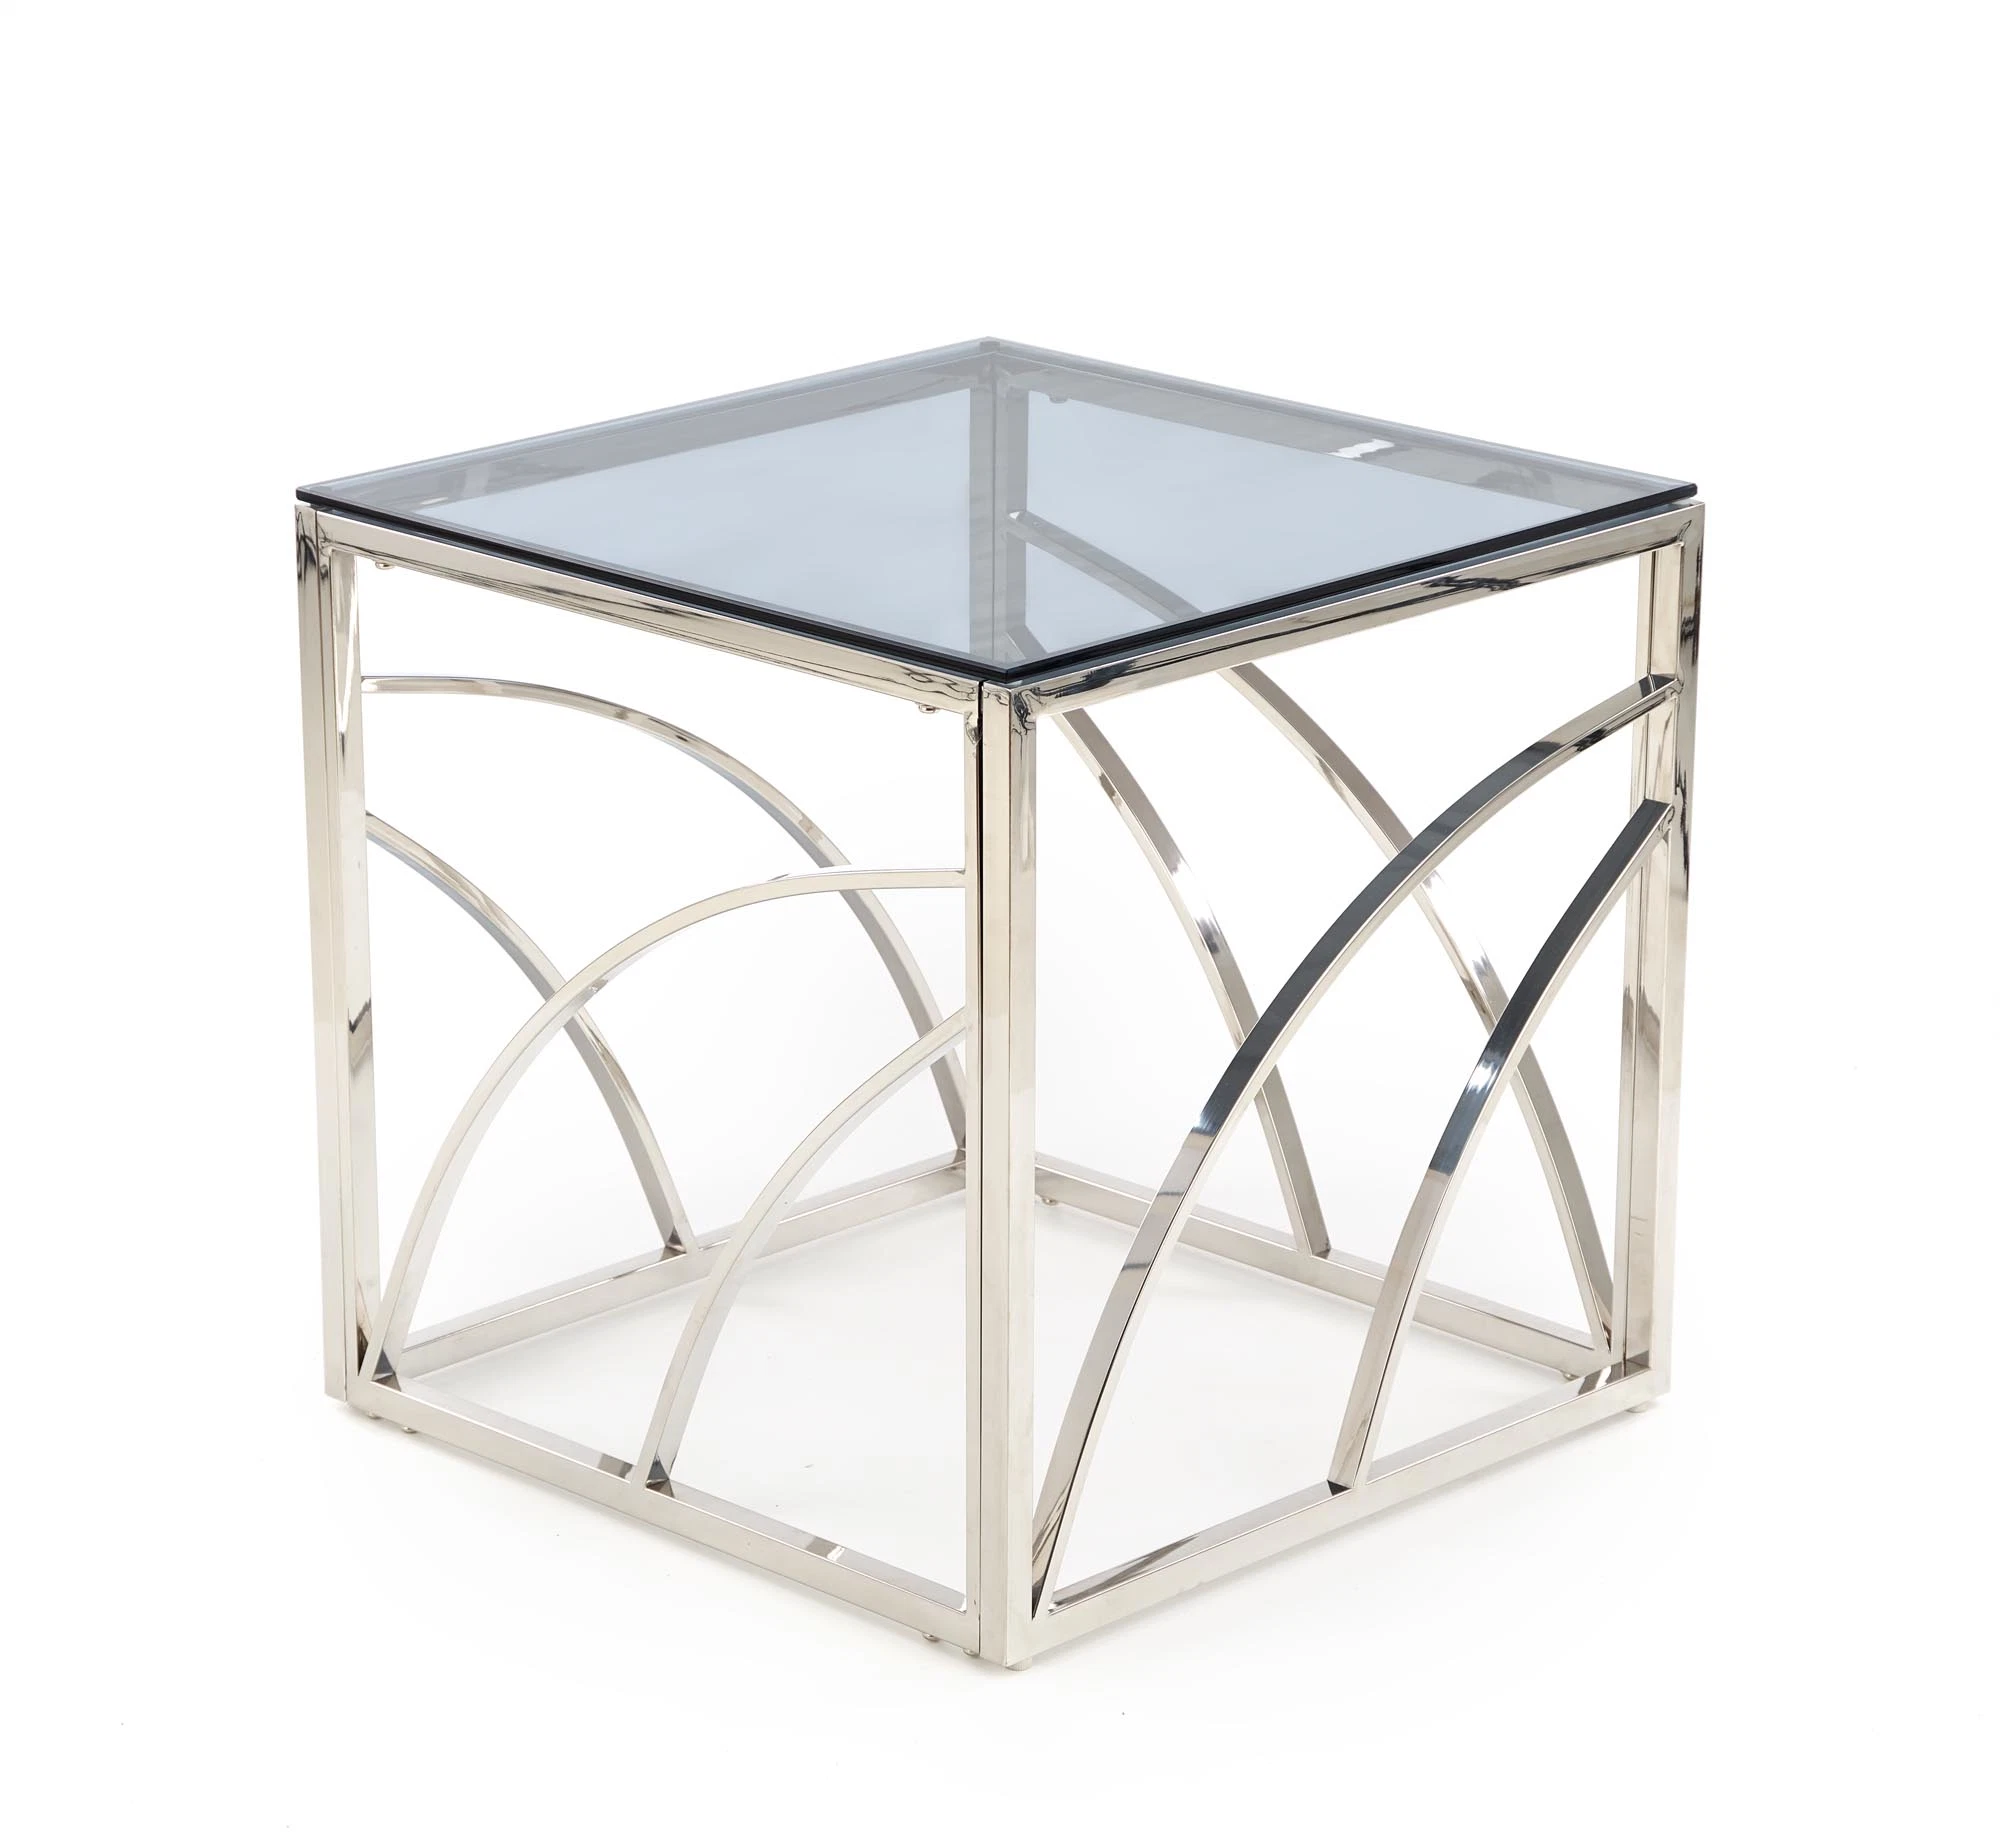 Popular Design Table Stainless Steel Console Table Tempered Glass Console Table Furniture